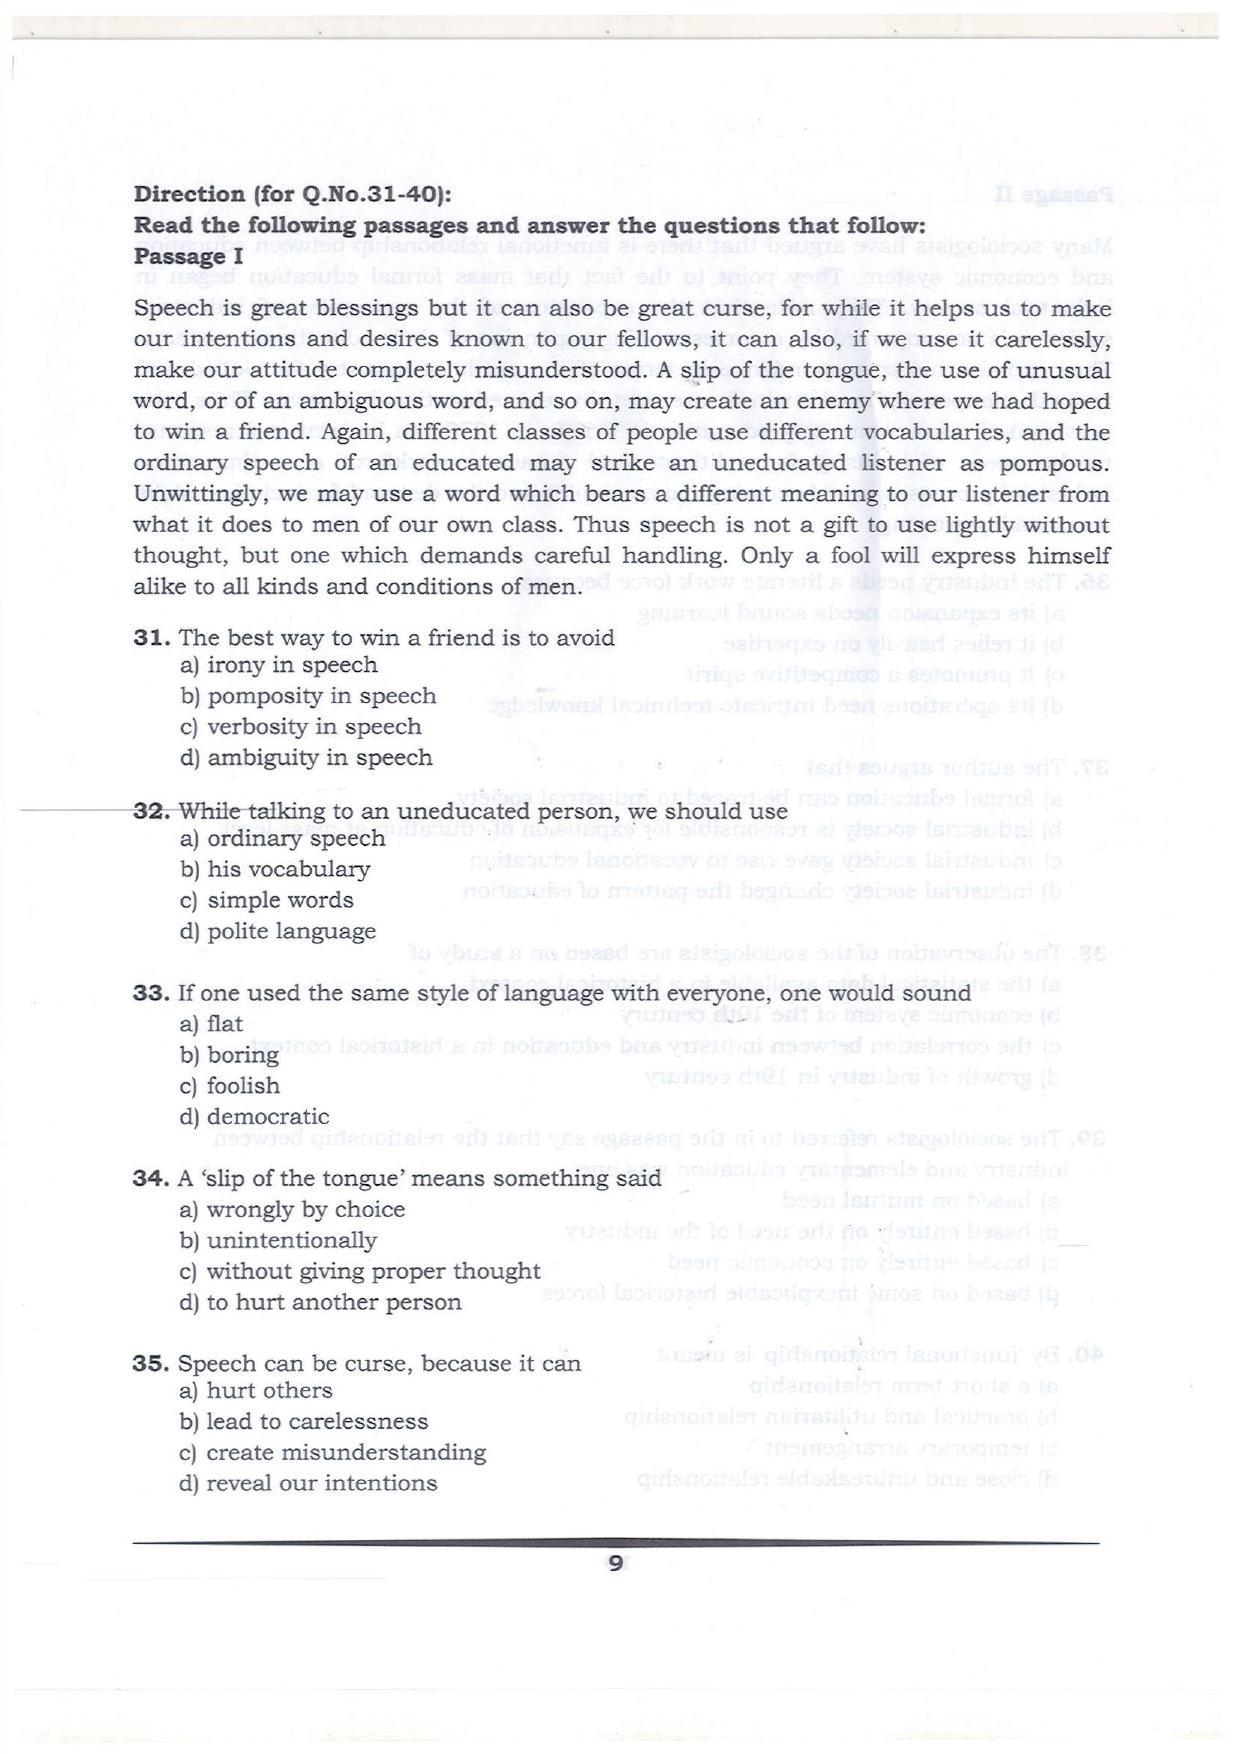 KMAT Question Papers - February 2018 - Page 8